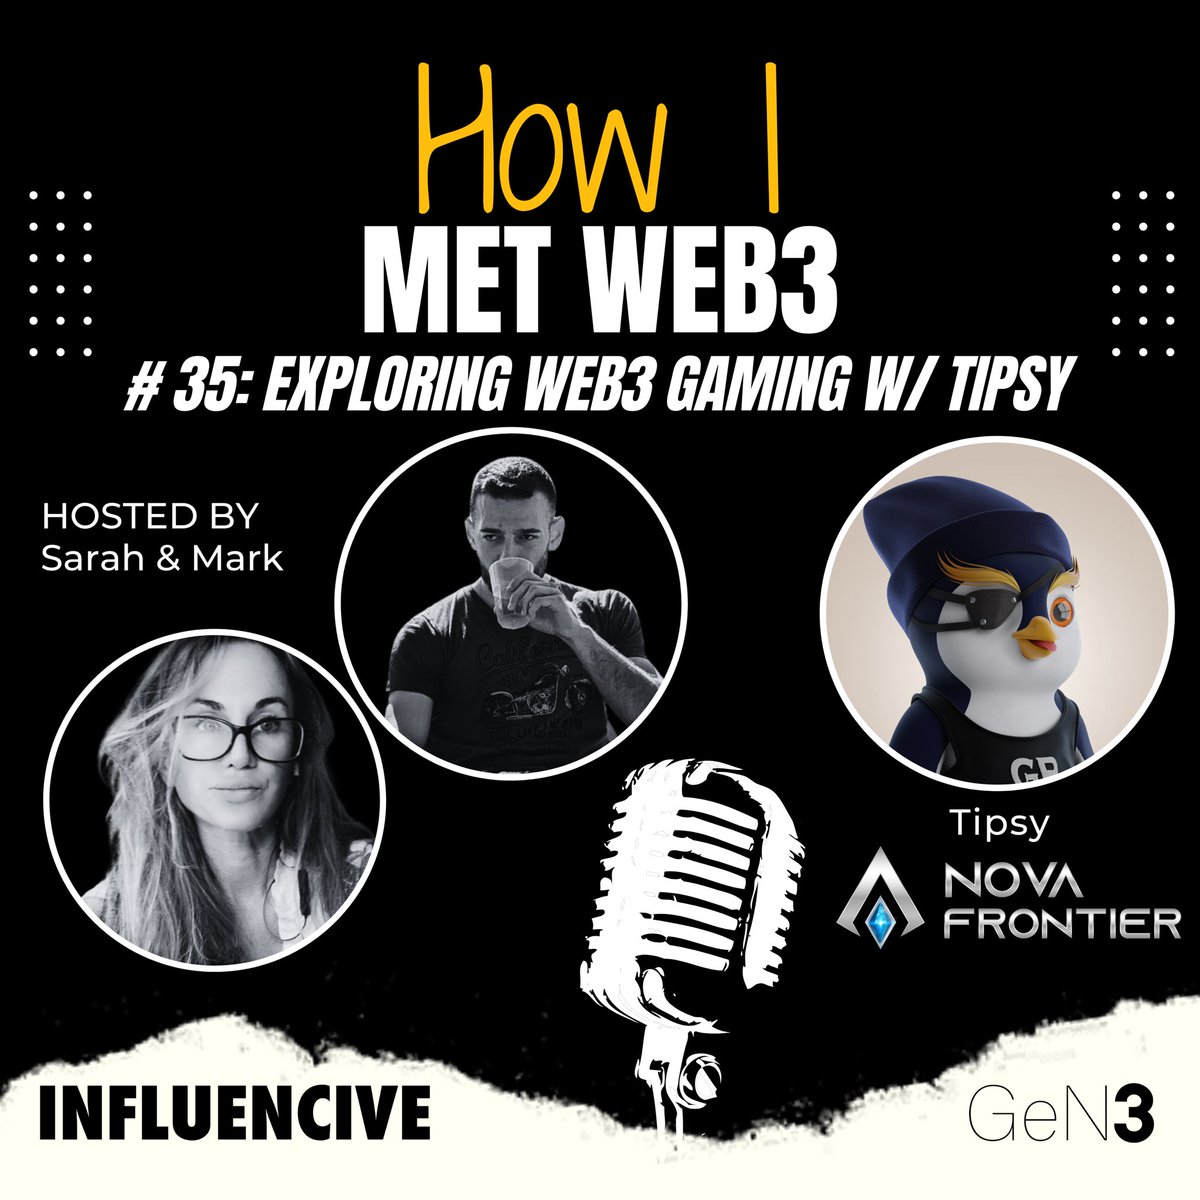 🎙️#35: Exploring Web3 Gaming w/ @ForeverTipsyETH @block_editor & @mhl_eth interview the Founder and CEO of @TipsyCoin, discussing Nova Frontier, Gate of Abyss, their upcoming Spaceship NFT launch and more. 🚀 Listen/Subscribe: open.spotify.com/episode/2jAbBh…